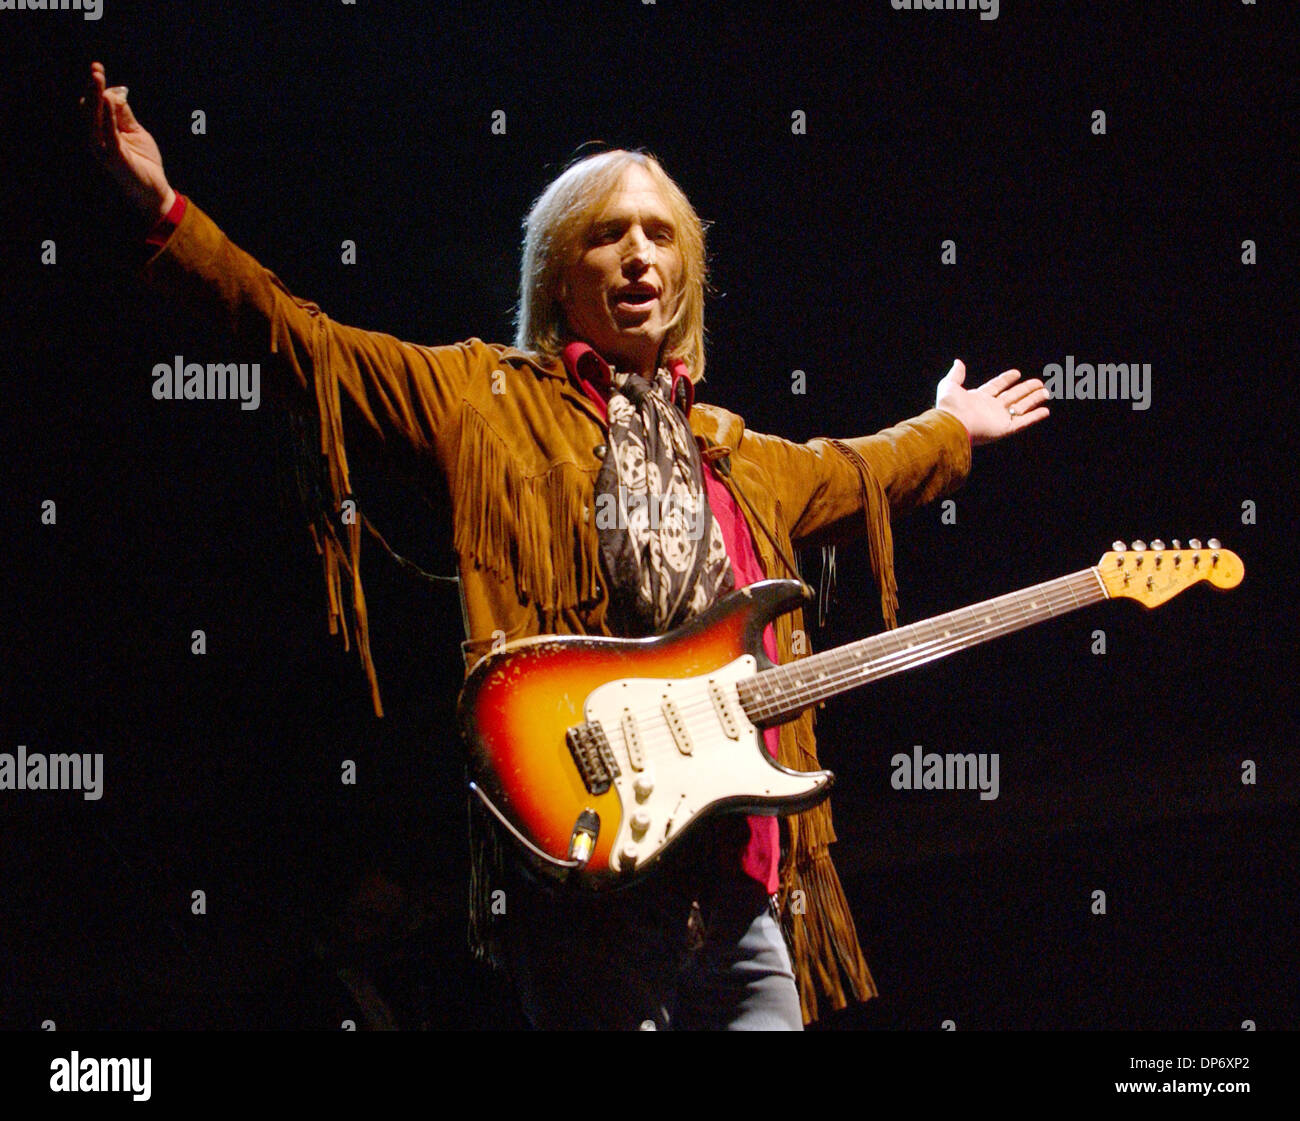 Oct 28, 2006; Las Vegas, NV, USA; Legendary Musicians TOM PETTY and the Heartbreakers perform live at the 2nd annual Vegoose Music Festival at Sam Boyd Stadium. Mandatory Credit: Photo by Jason Moore/ZUMA Press. (©) Copyright 2006 by Jason Moore Stock Photo